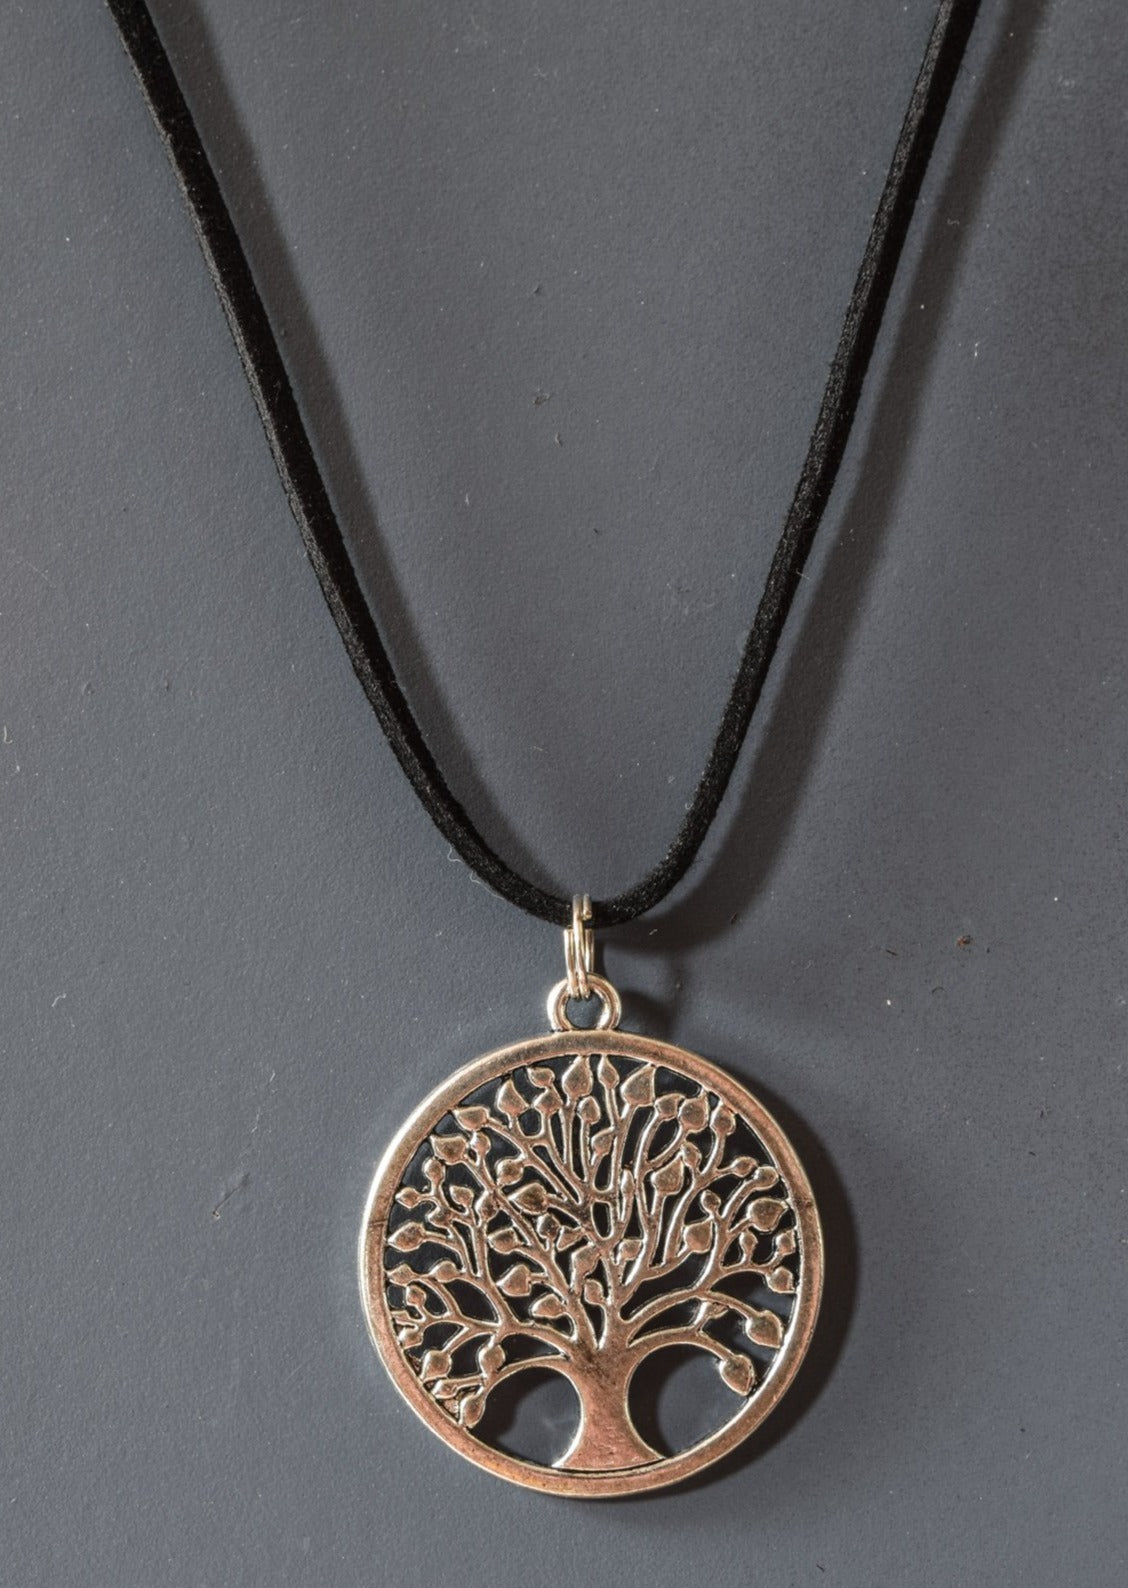 Woodlands, Silver Tree of Life Pendant on a Black Faux Leather Cord Ne –  Urban Drygoods, ltd